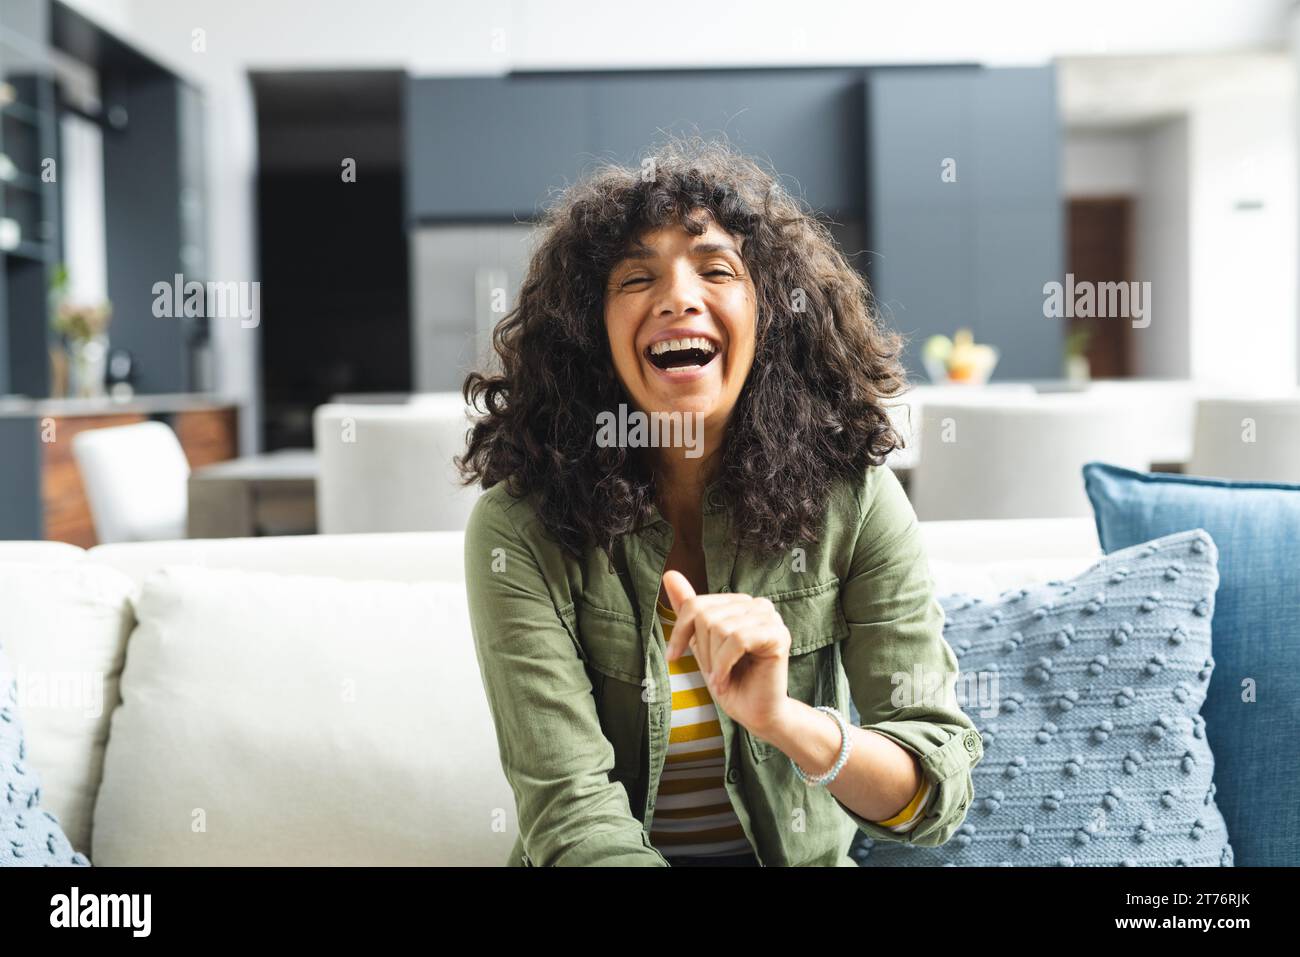 Happy mature caucasian woman having video call, laughing on couch in sunny living room, copy space Stock Photo